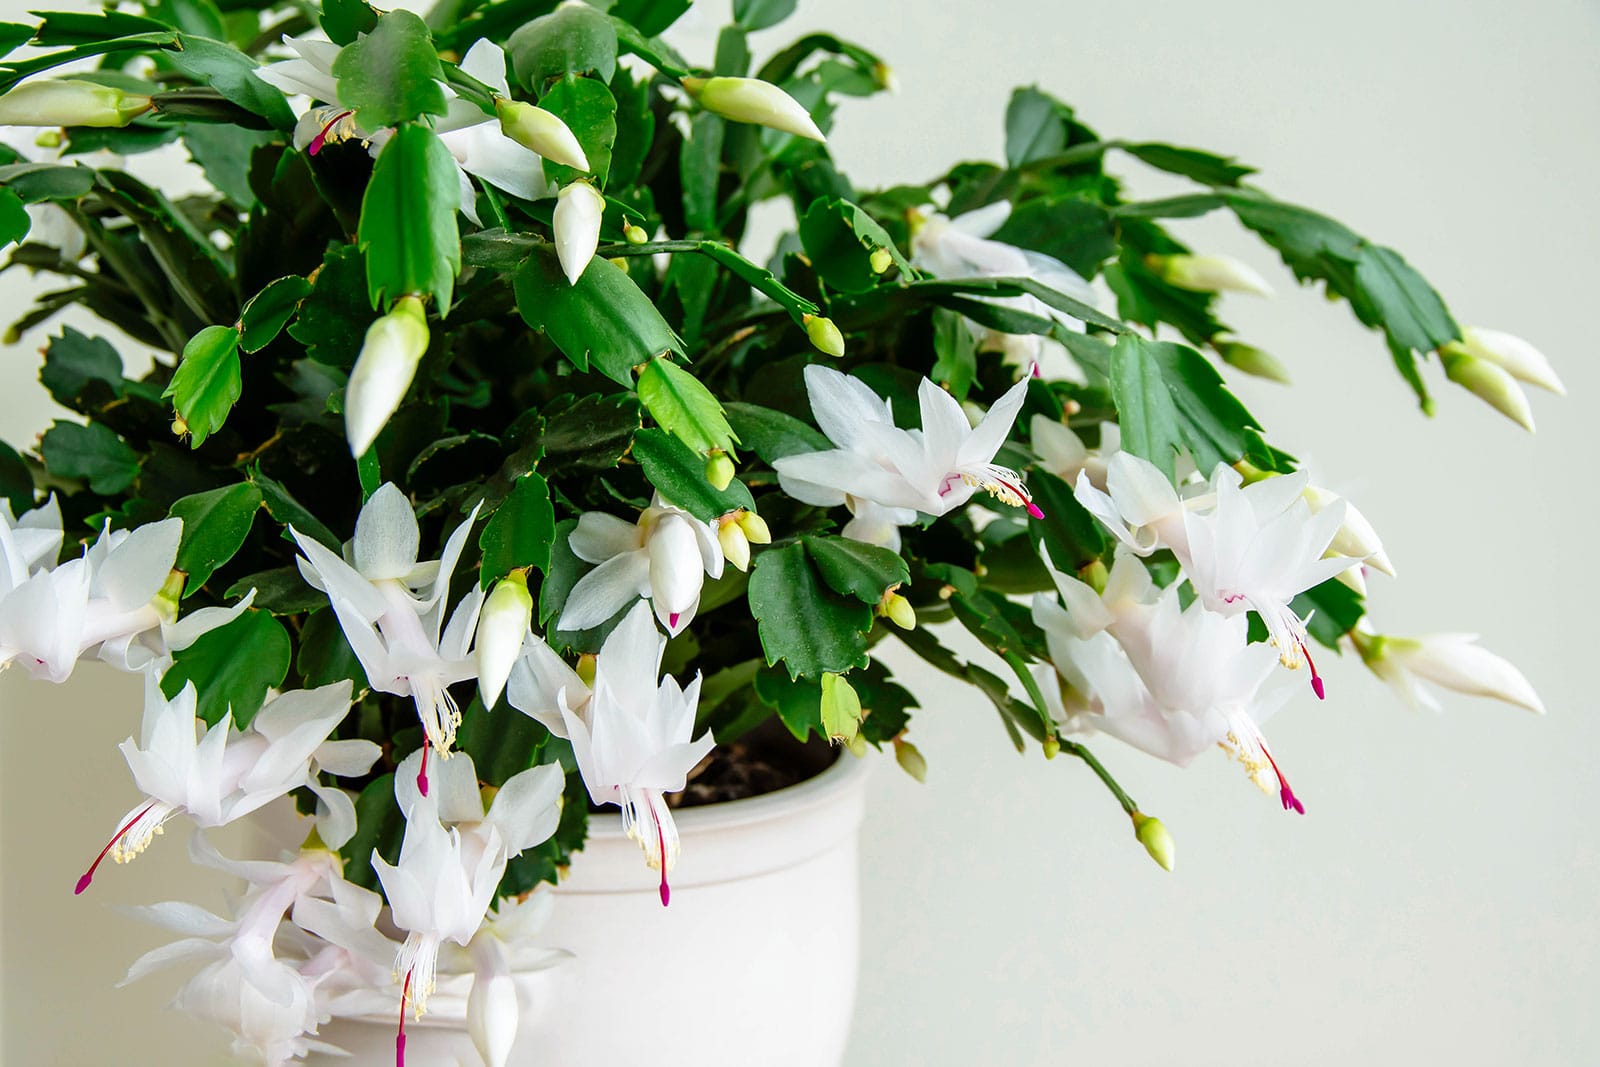 Thanksgiving cactus plant (Schlumbergera) in a white pot blooming with white flowers